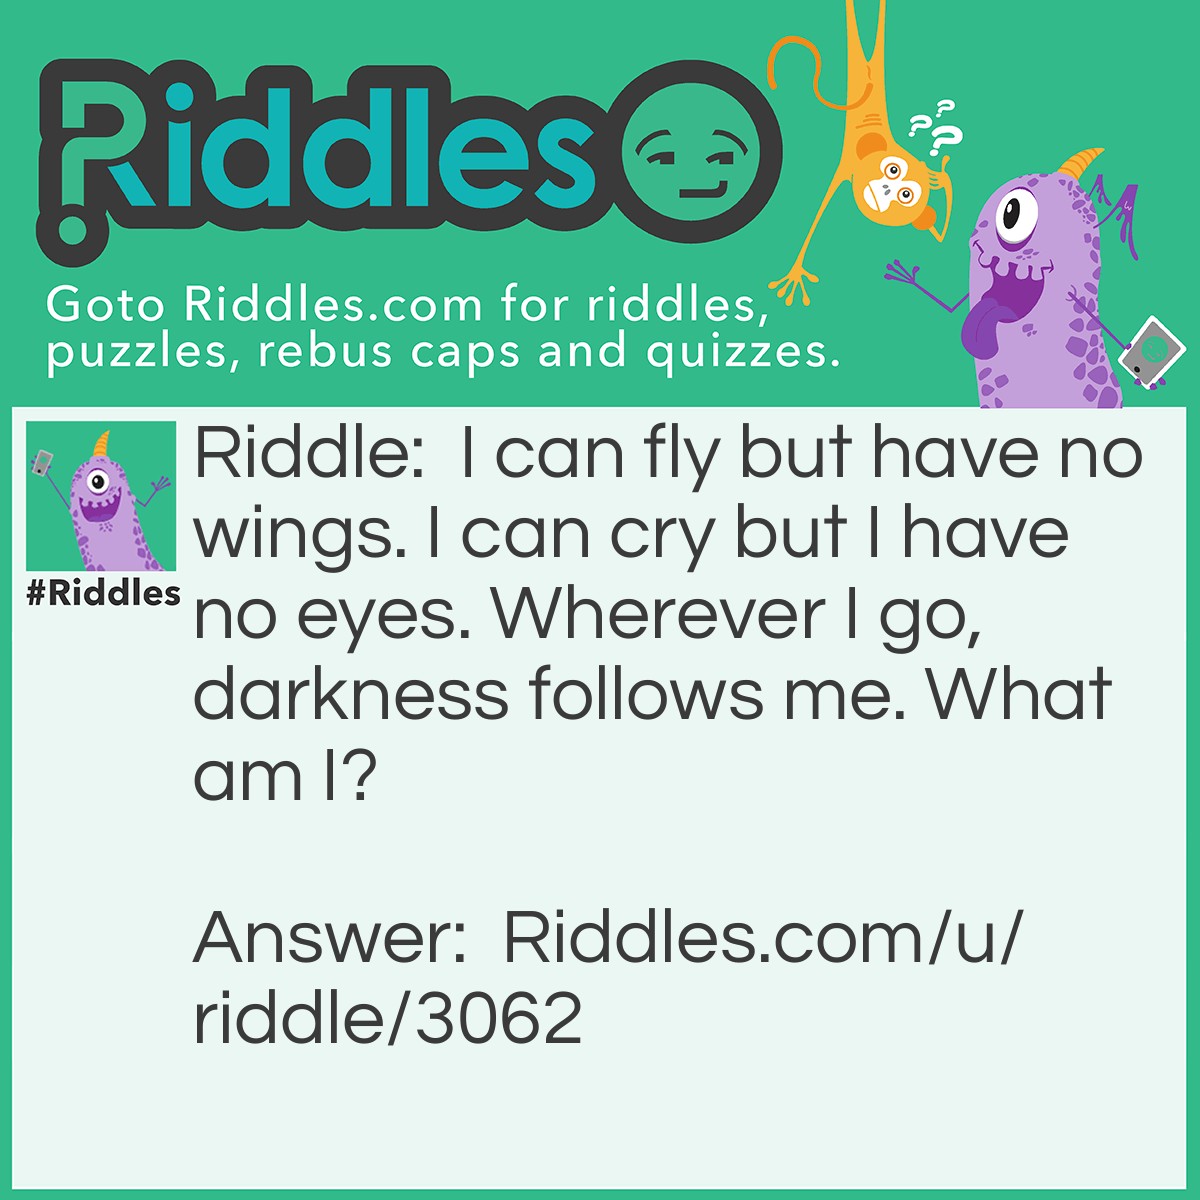 Riddle: I can fly but have no wings. I can cry but I have no eyes. Wherever I go, darkness follows me. What am I? Answer: Clouds.